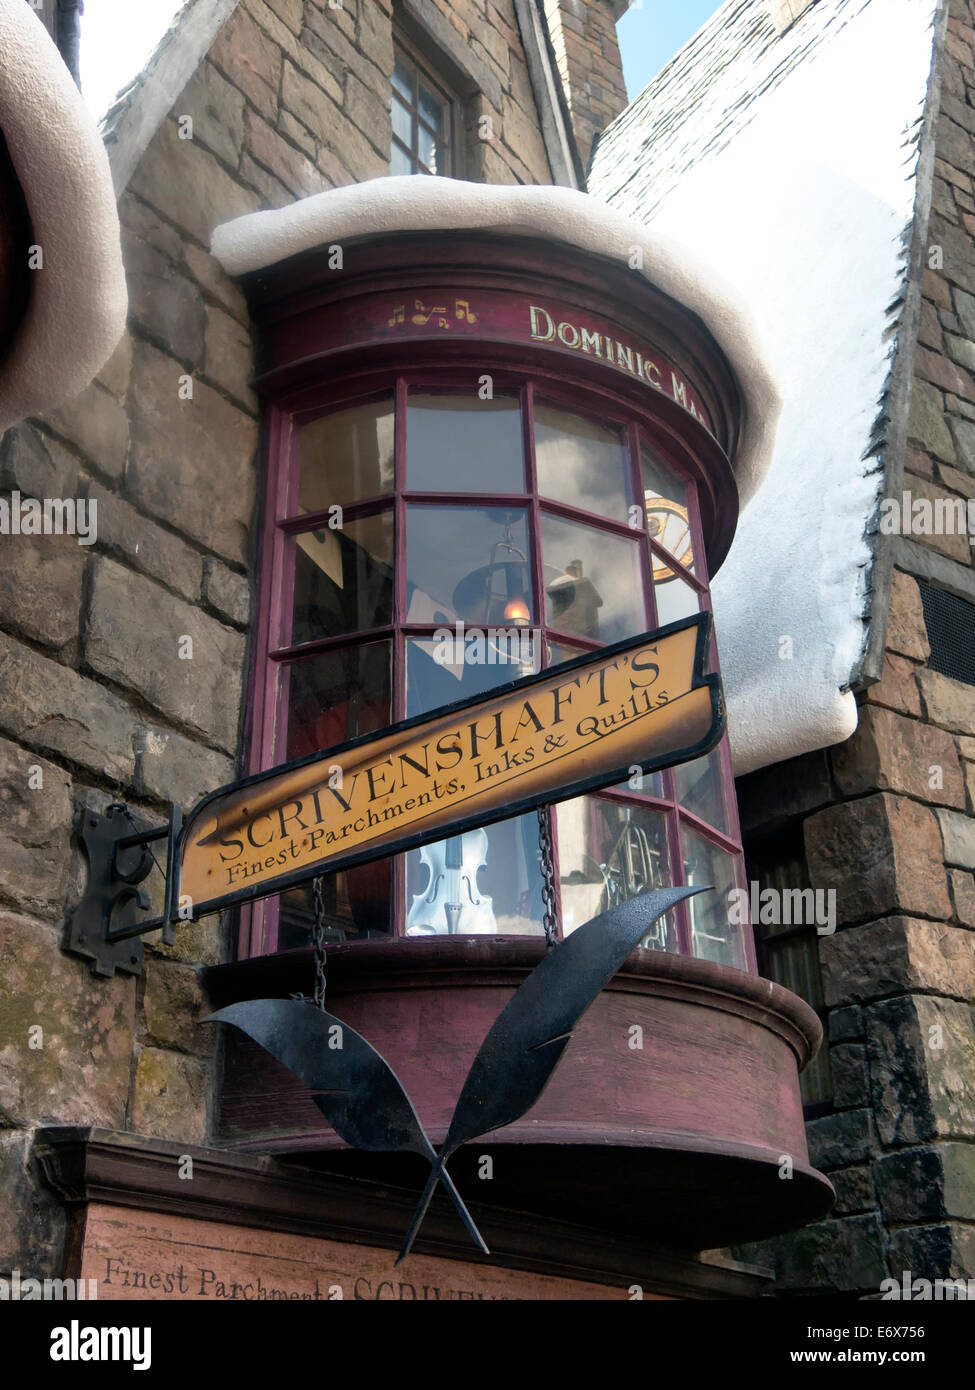 Facade of Scrivenshaft's Quill Shop in The Islands of Adventure Theme Park Orlando Stock Photo